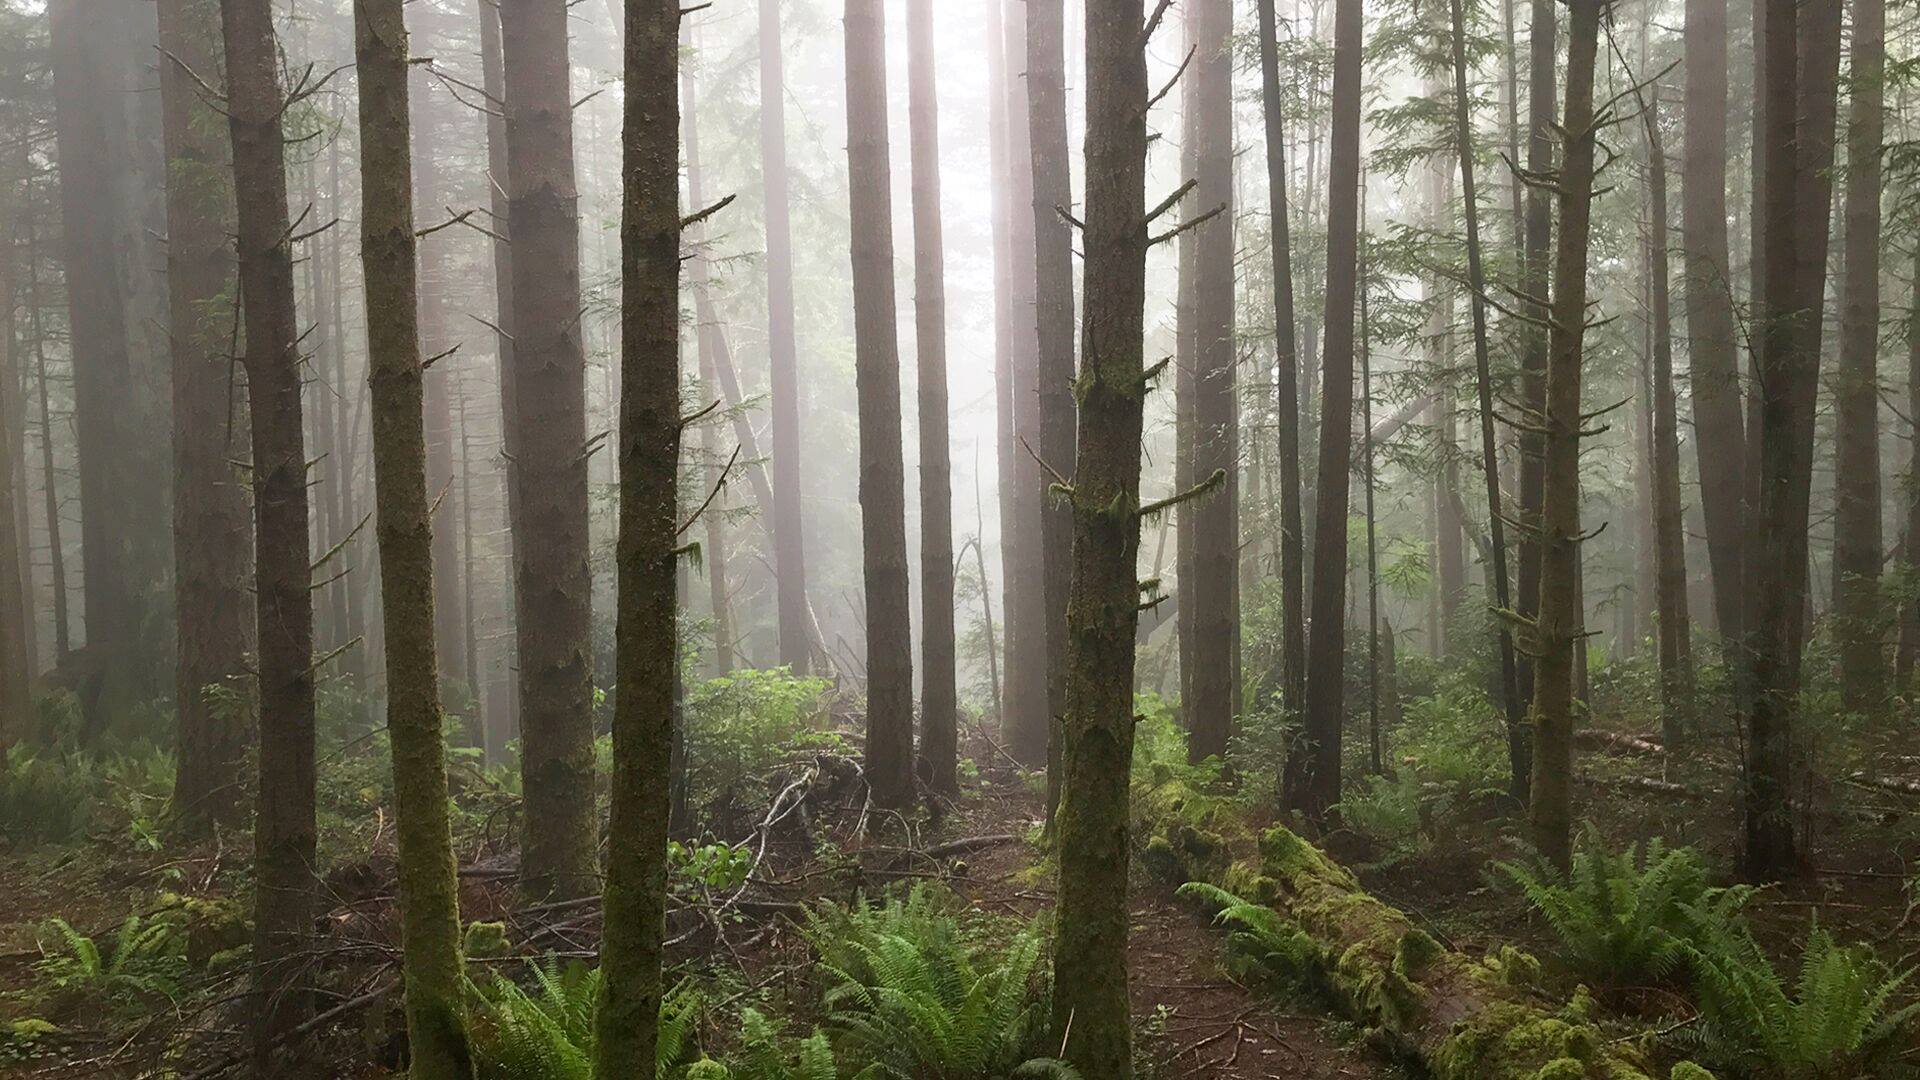 A stock photo that looks like misty forest full of tall, thin trees, with a few treetops visible and fallen green branches on the forest floor.